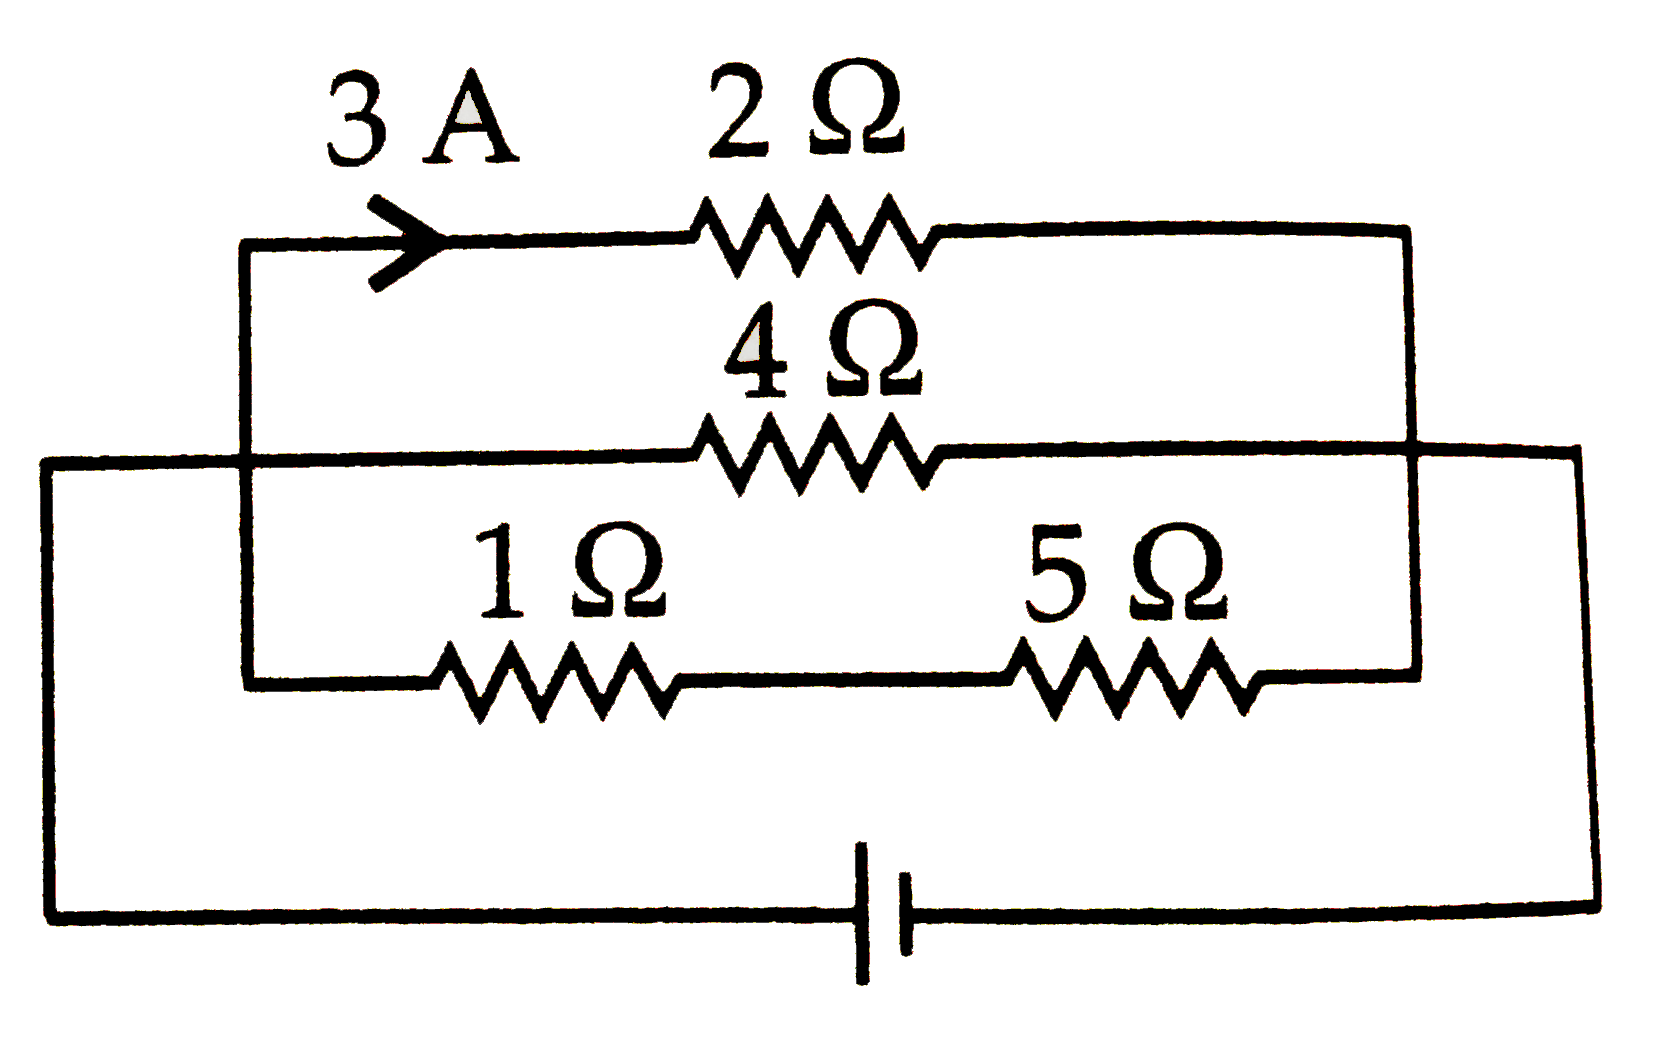 A current of 3 A flows through the 2 Omega  resistor shown in the circuit below. The power dissipated in the 5 Omega resistor is